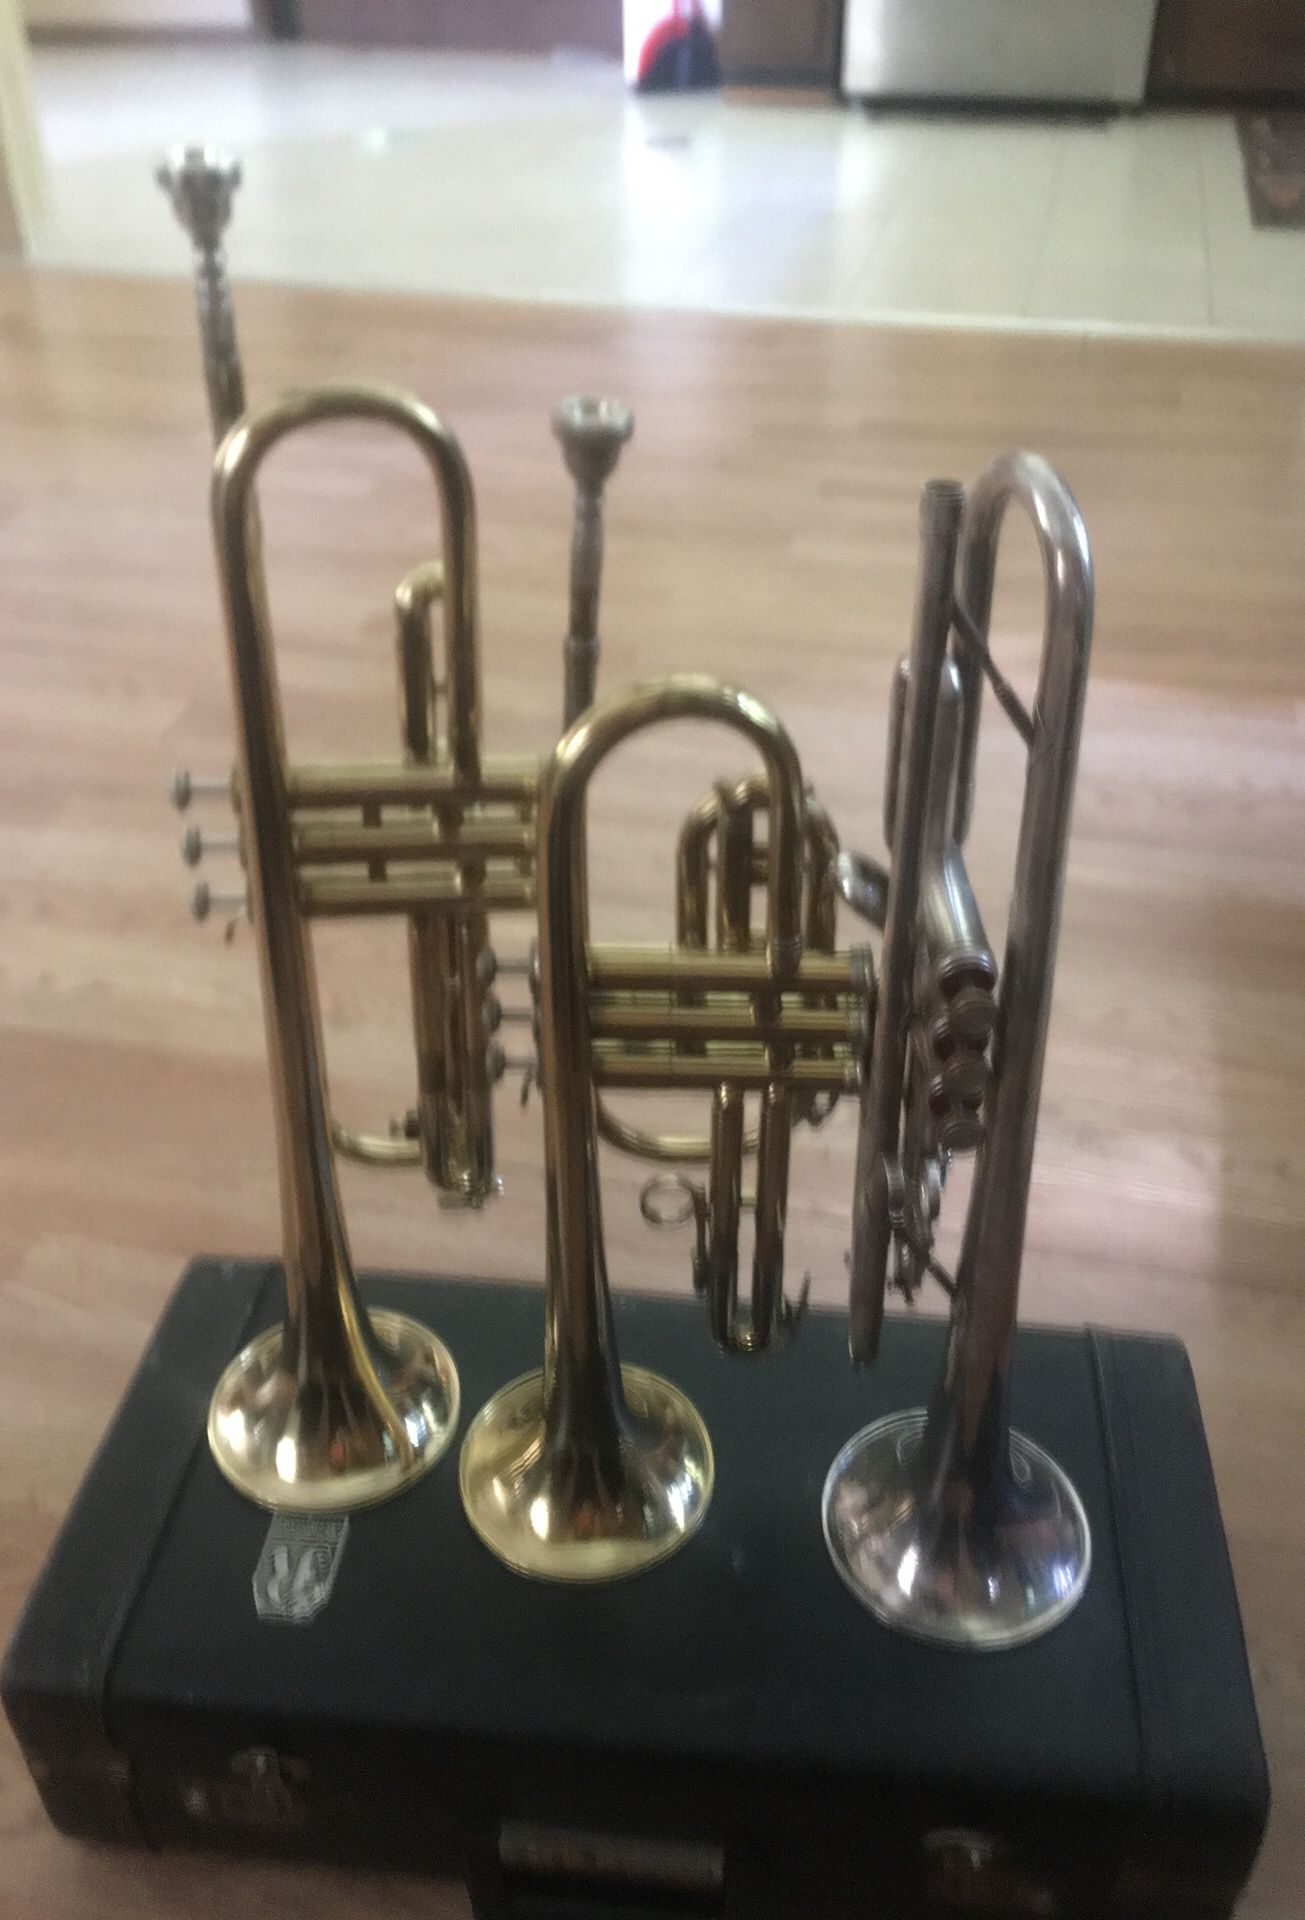 Trumpets 90$ each - come with case.